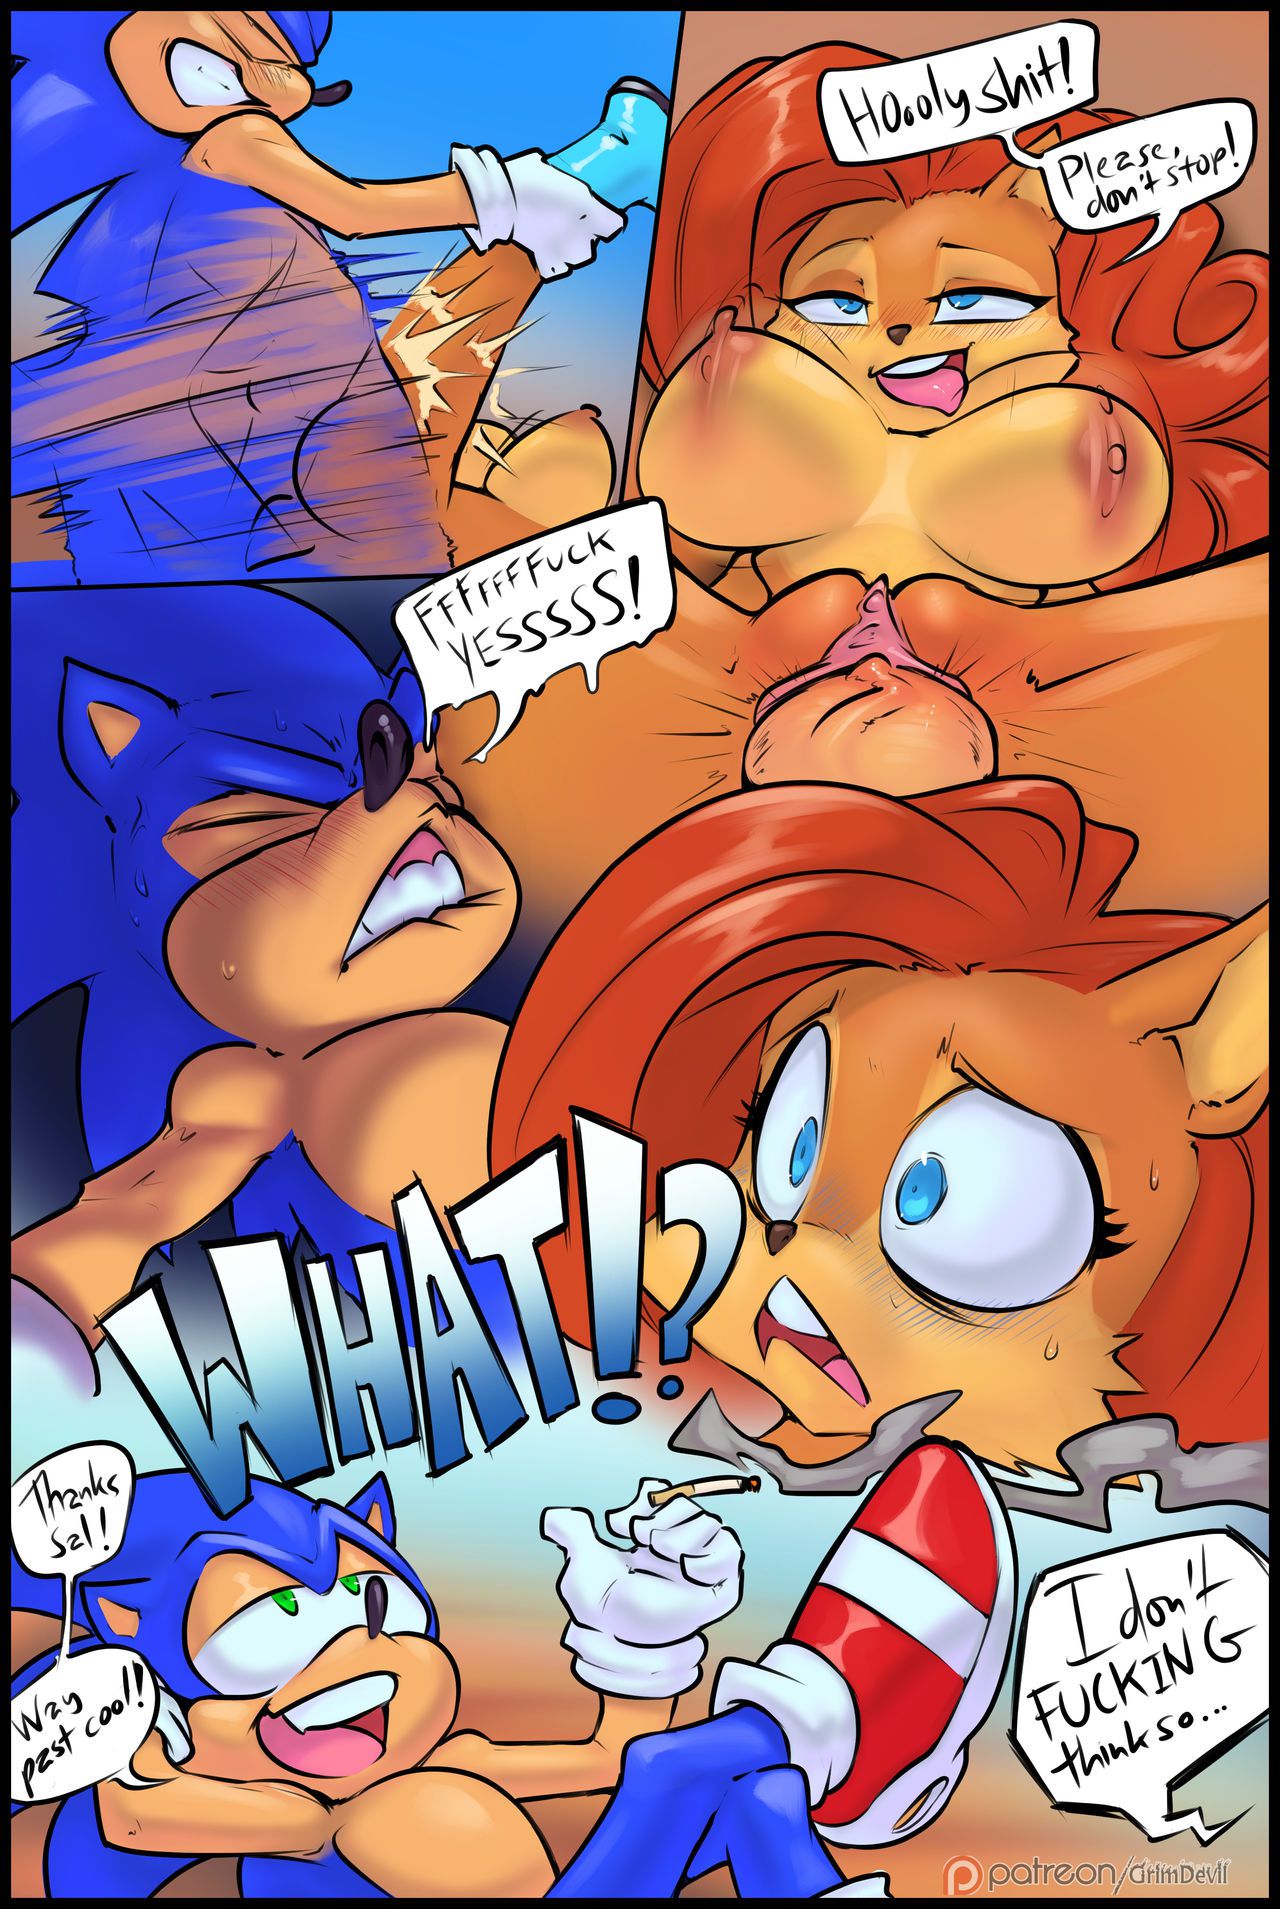 [GrimDevil] Sally Comic (Sonic The Hedgehog) [Ongoing] 16